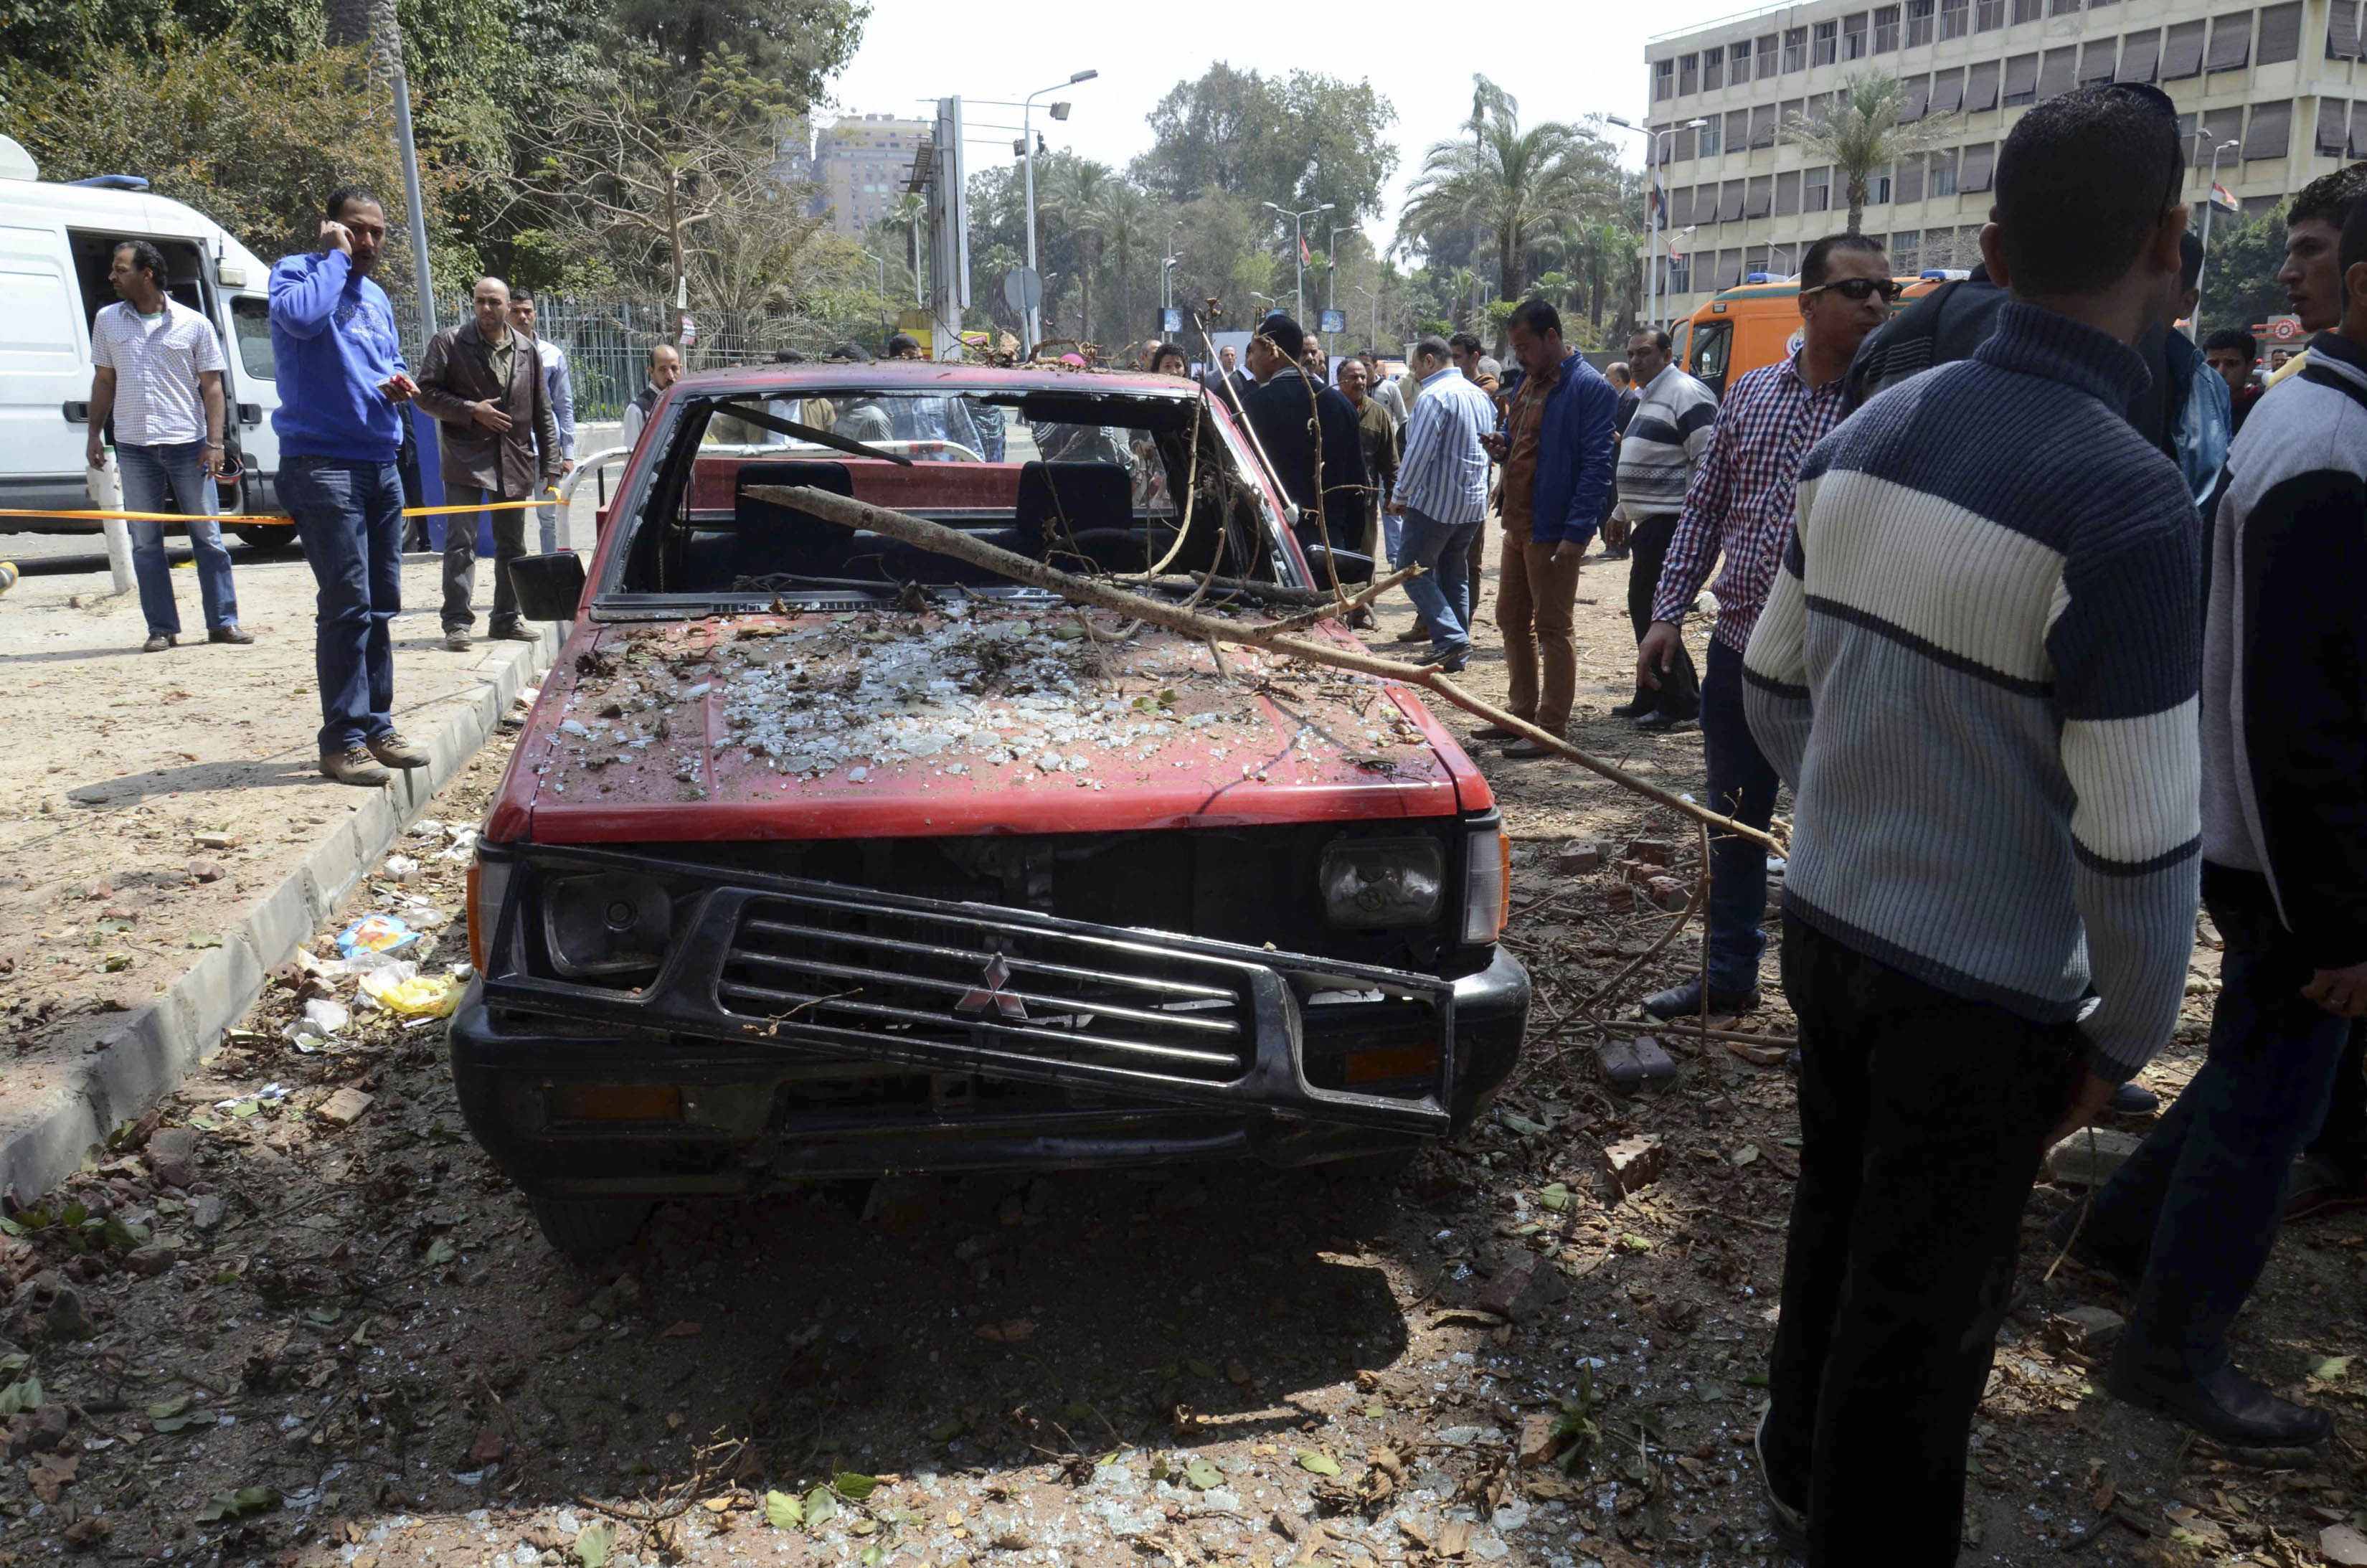 UPDATE 2 - Explosion outside Cairo University injures 10- state TV